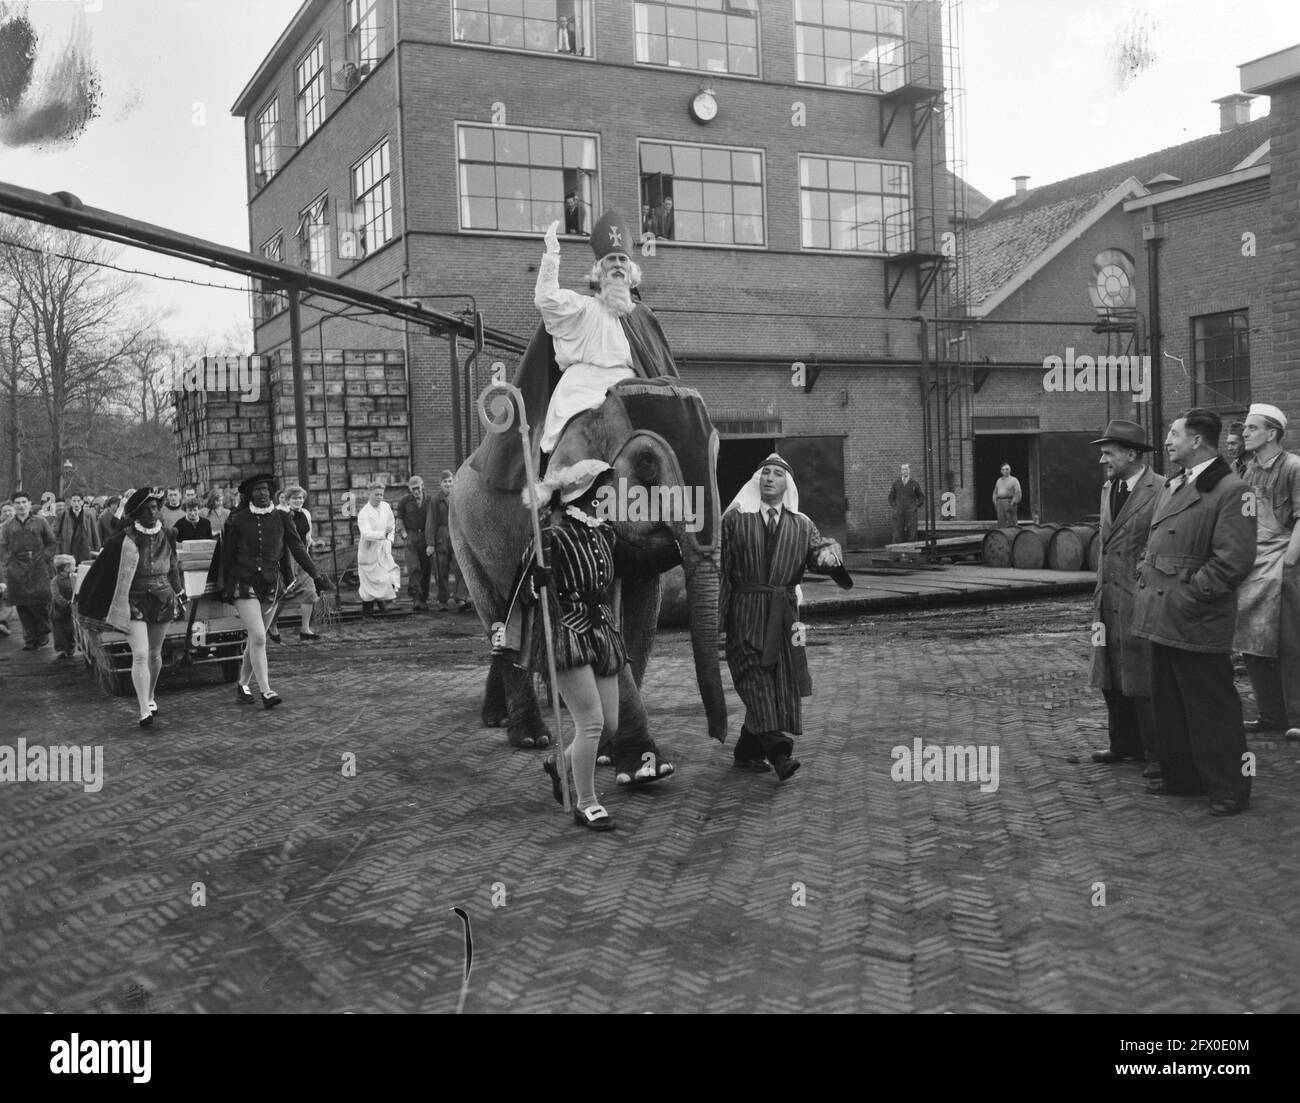 Saint Nicholas on elephant visiting Chemical Factory Naarden, December 1, 1954, OLIFANTS, The Netherlands, 20th century press agency photo, news to remember, documentary, historic photography 1945-1990, visual stories, human history of the Twentieth Century, capturing moments in time Stock Photo